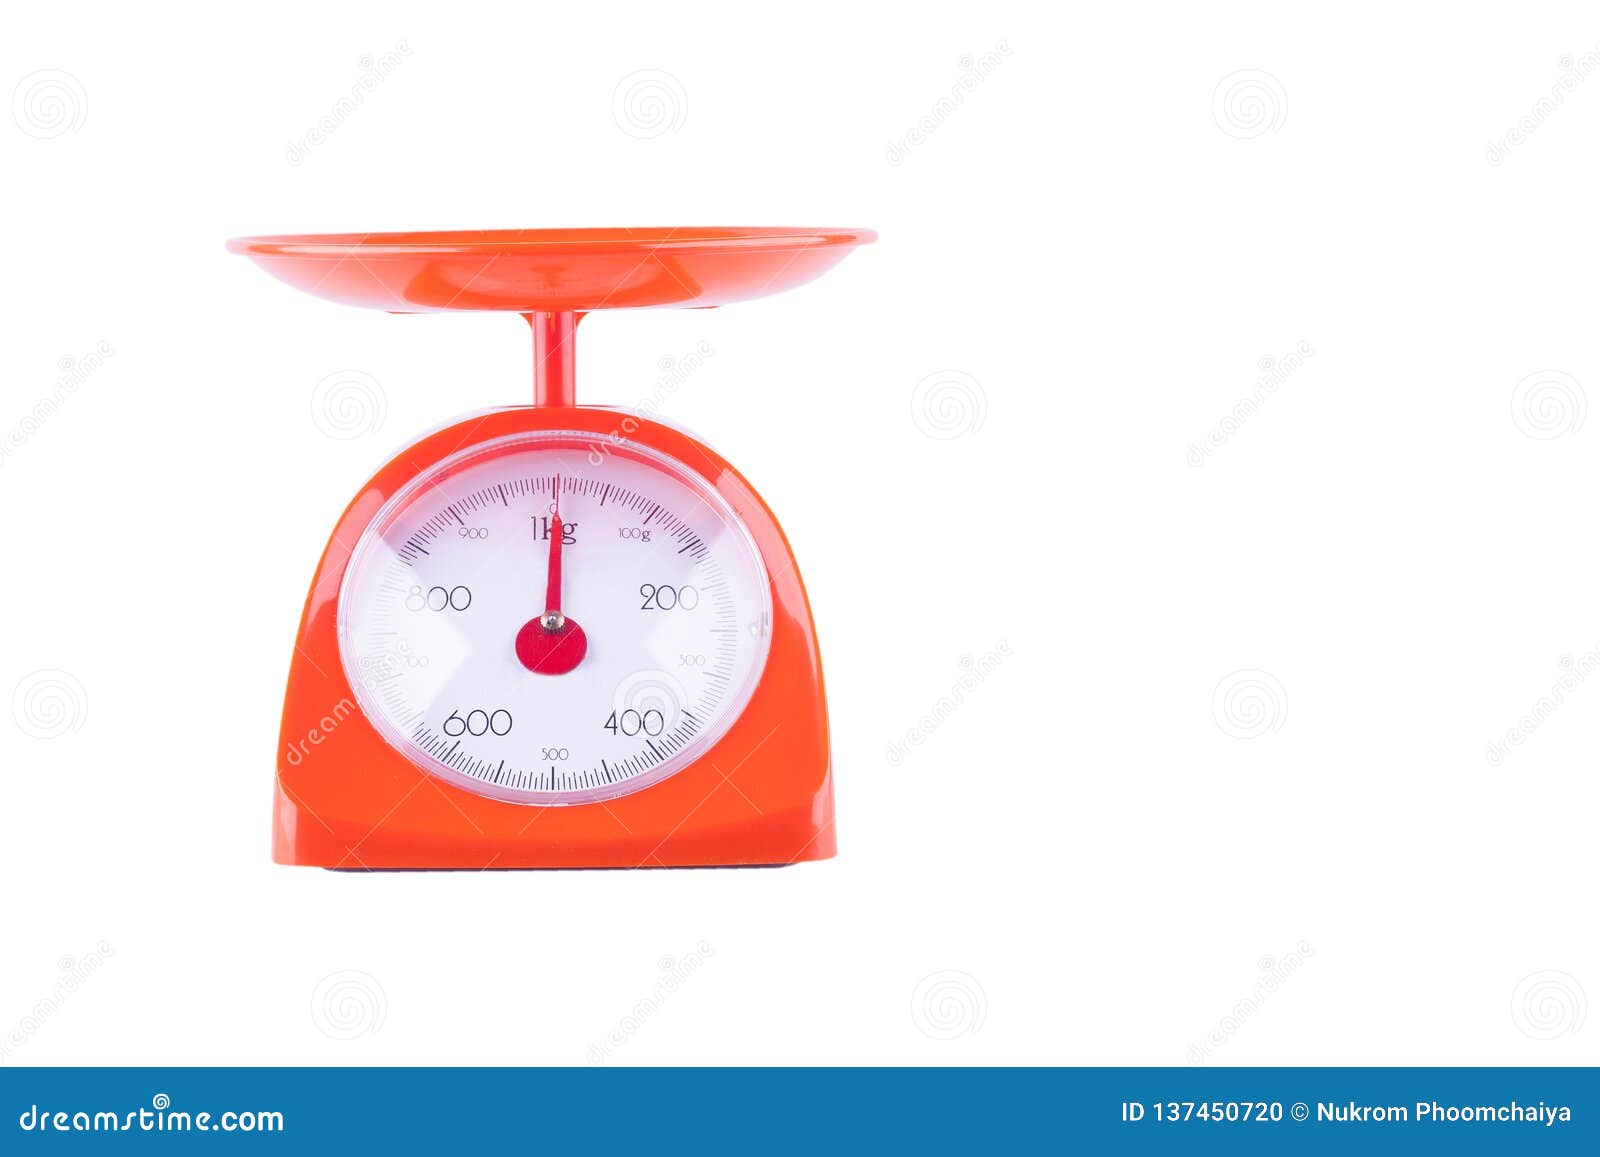 https://thumbs.dreamstime.com/z/weight-balance-weighing-scale-food-machine-white-background-kitchen-equipment-object-isolated-137450720.jpg